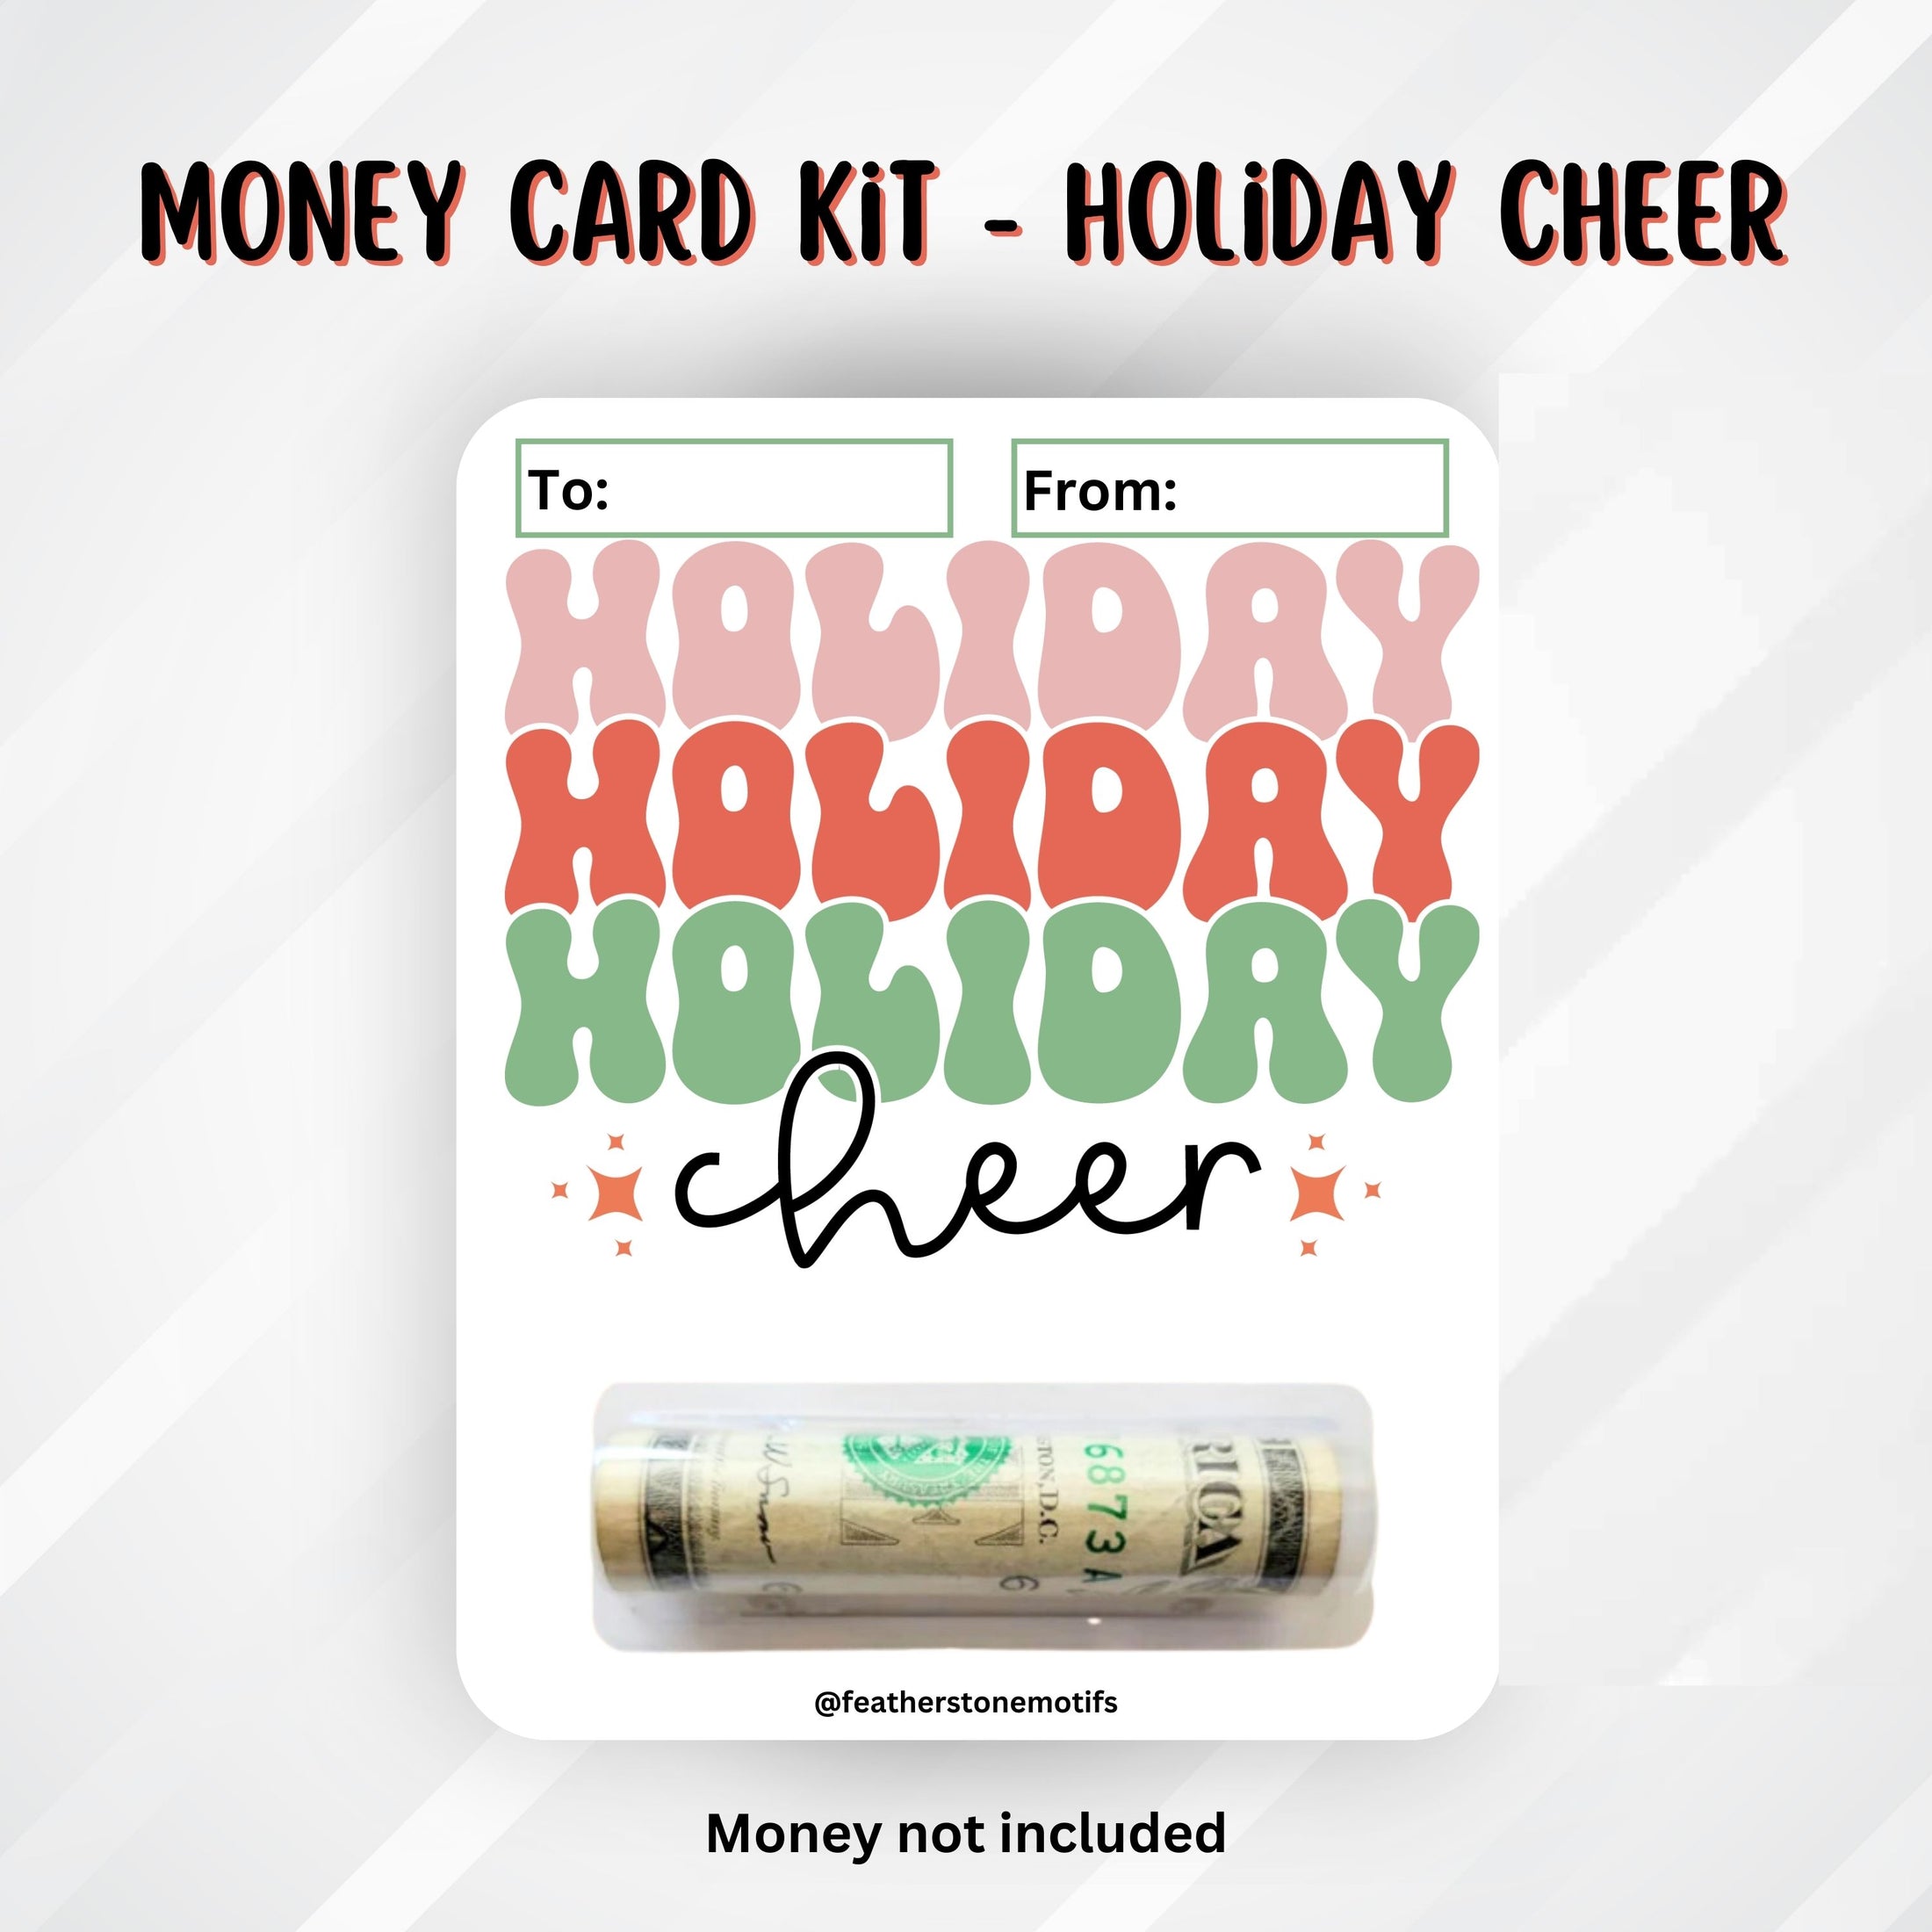 This image shows the money tube applied to the Holiday Cheer money card.